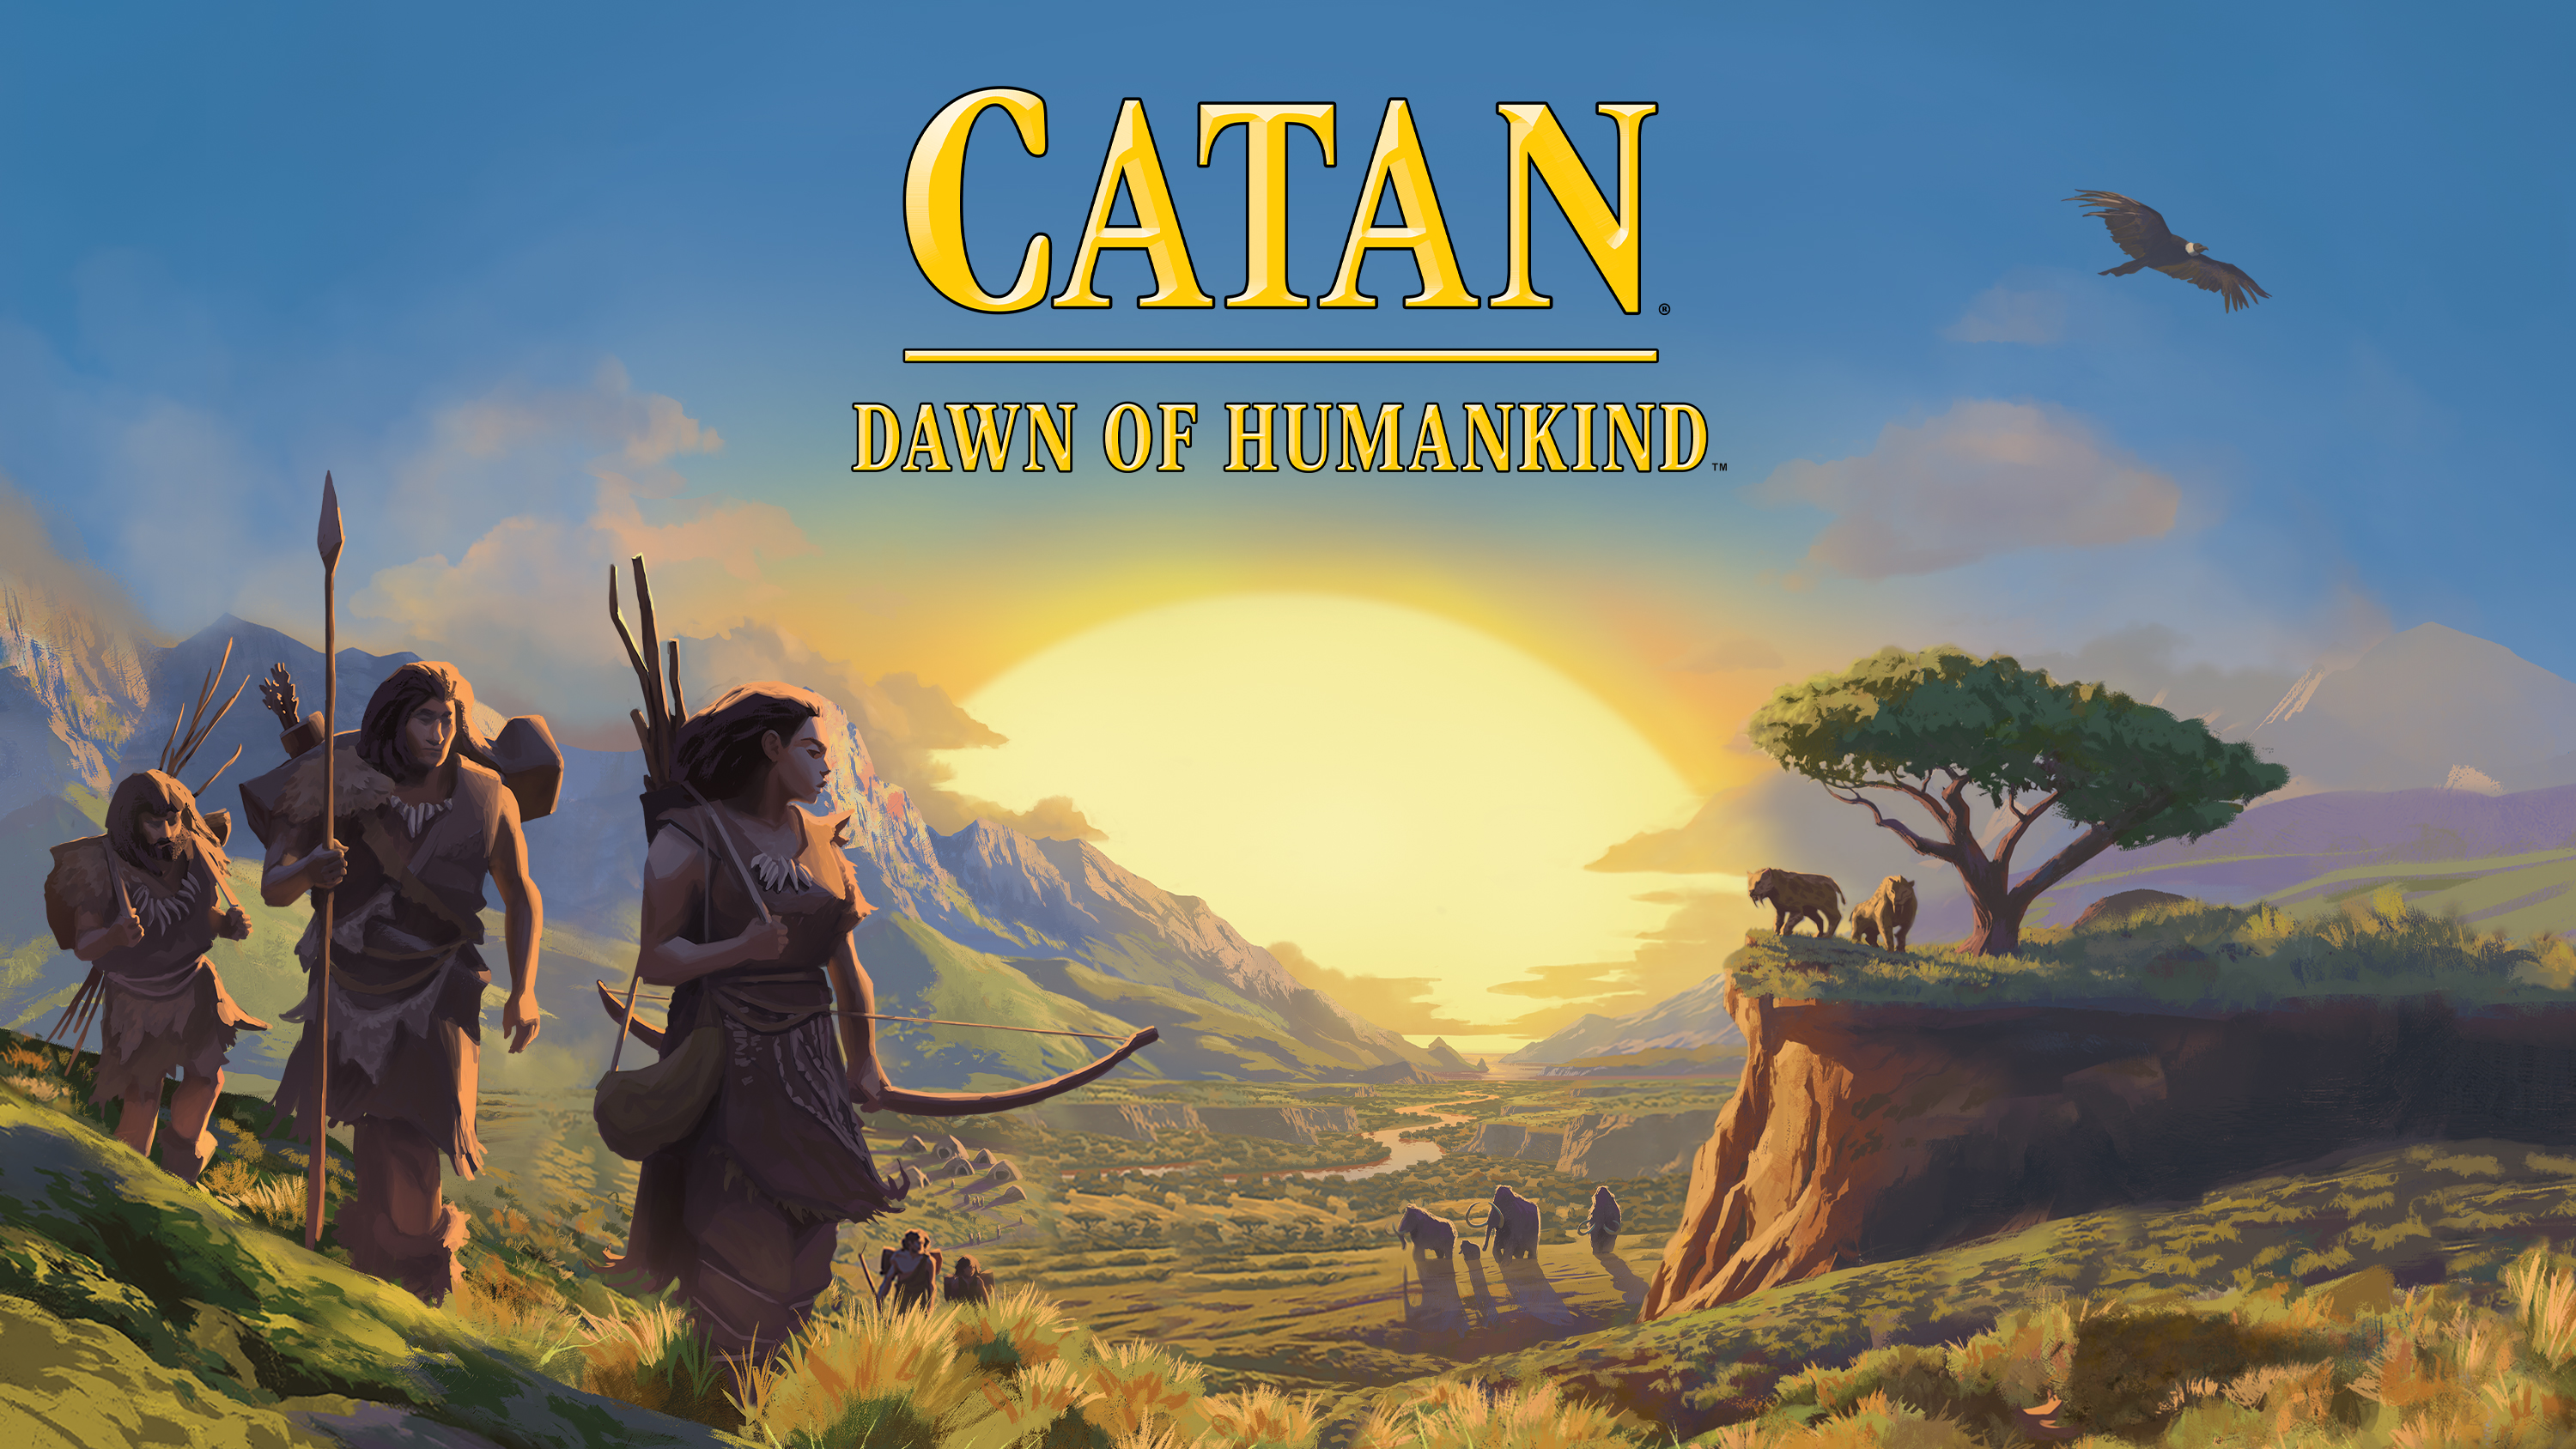 Classic Catan spinoff gets a reboot later this year: Dawn of Humankind